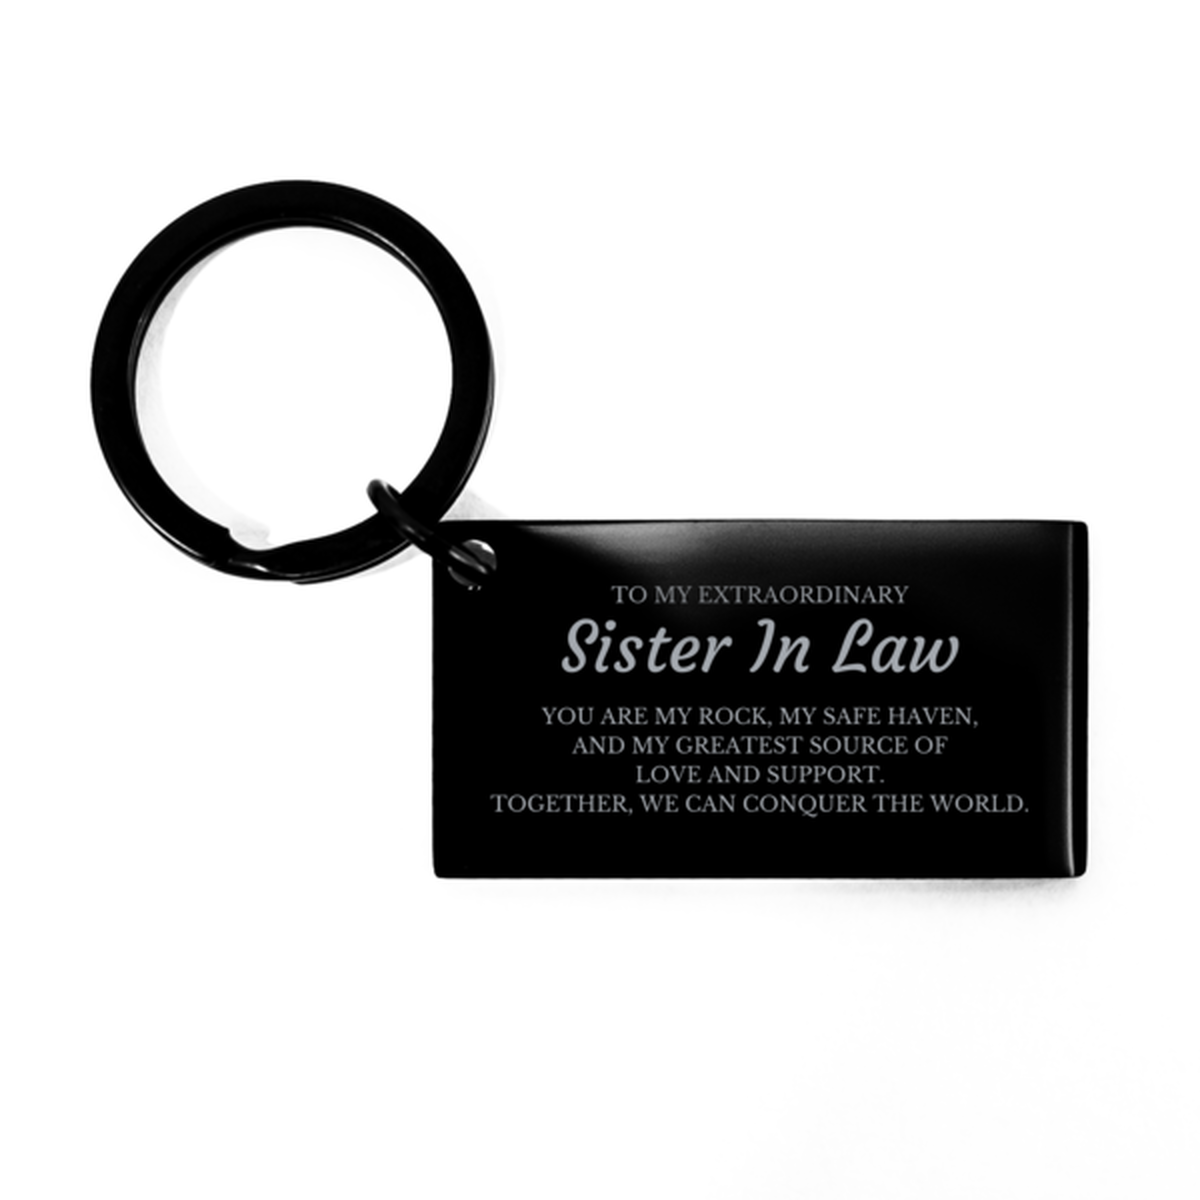 To My Extraordinary Sister In Law Gifts, Together, we can conquer the world, Birthday Keychain For Sister In Law, Christmas Gifts For Sister In Law